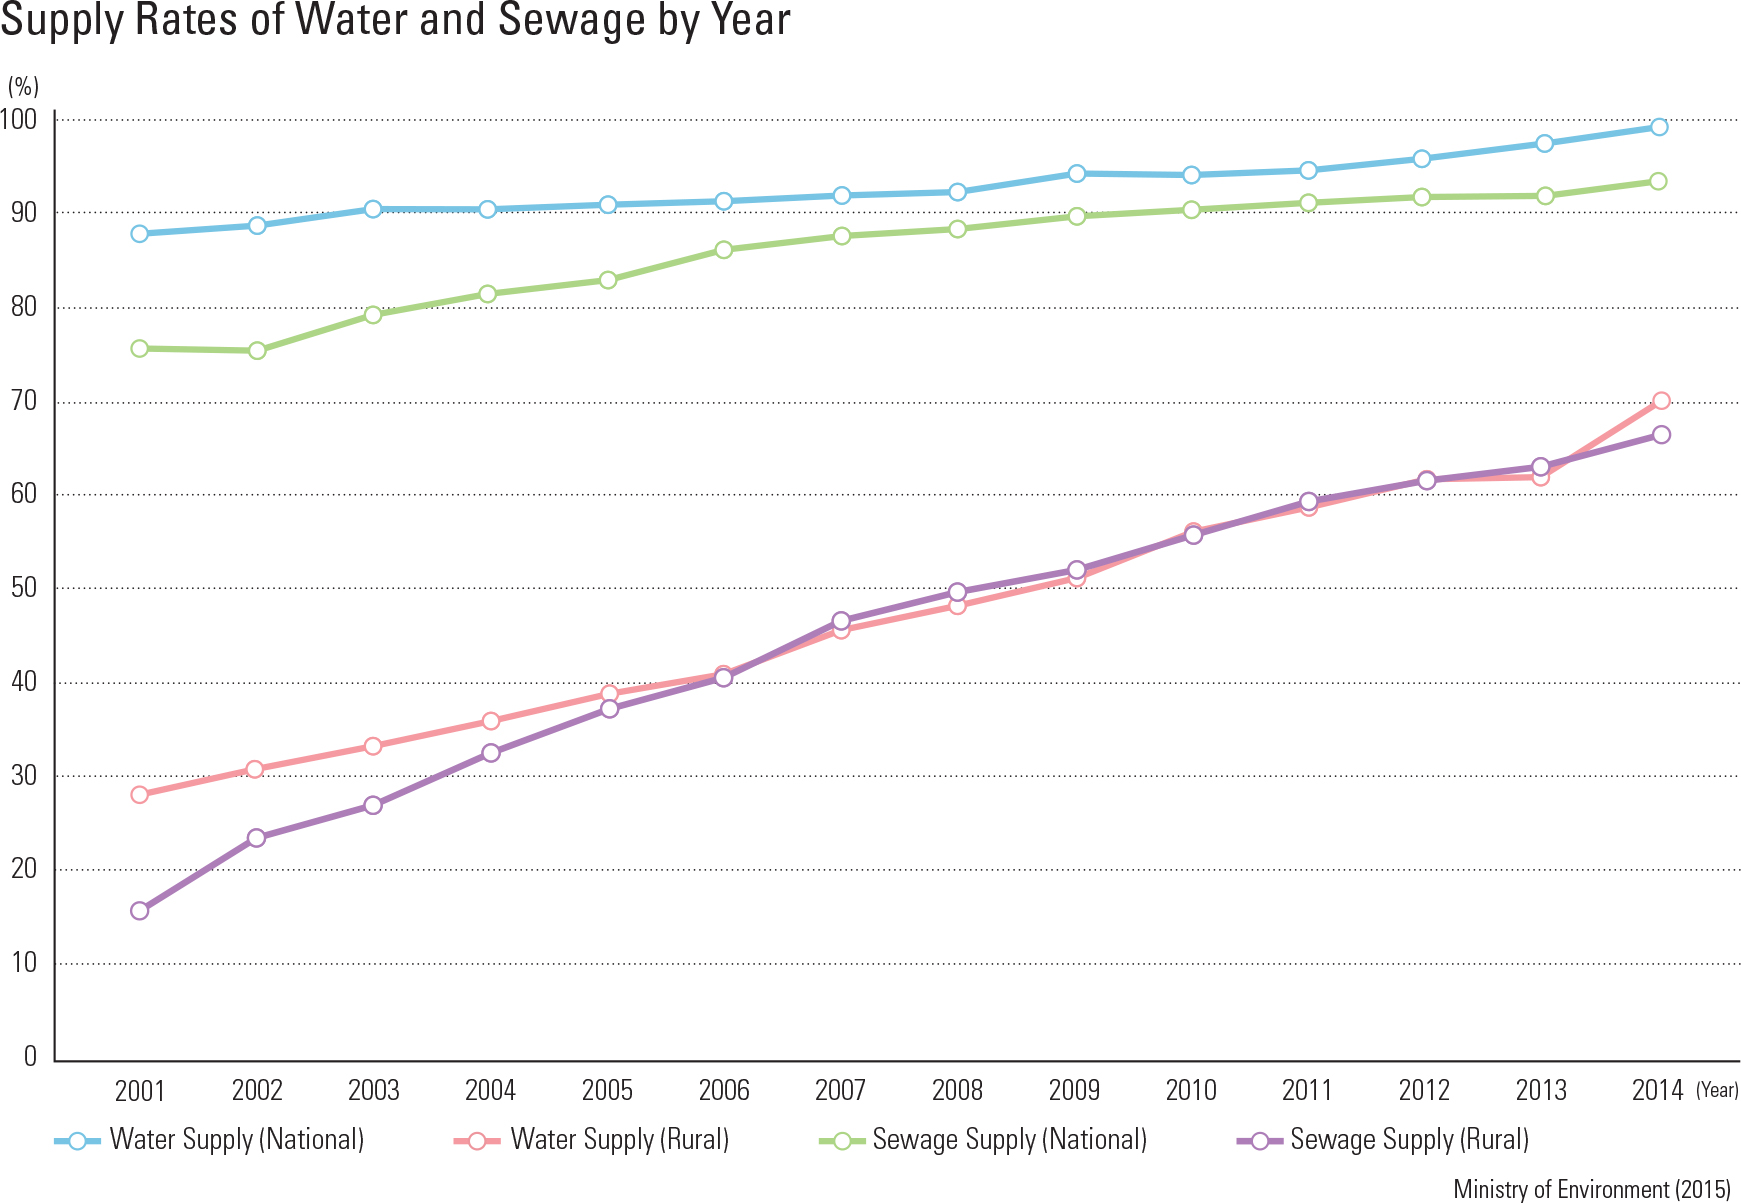 Supply Rates of Water and Sewage by Year<p class="oz_zoom" zimg="http://imagedata.cafe24.com/us_2/us2_228-2_2.jpg"><span style="font-family:Nanum Myeongjo;"><span style="font-size:18px;"><span class="label label-danger">UPDATE DATA</span></span></p>